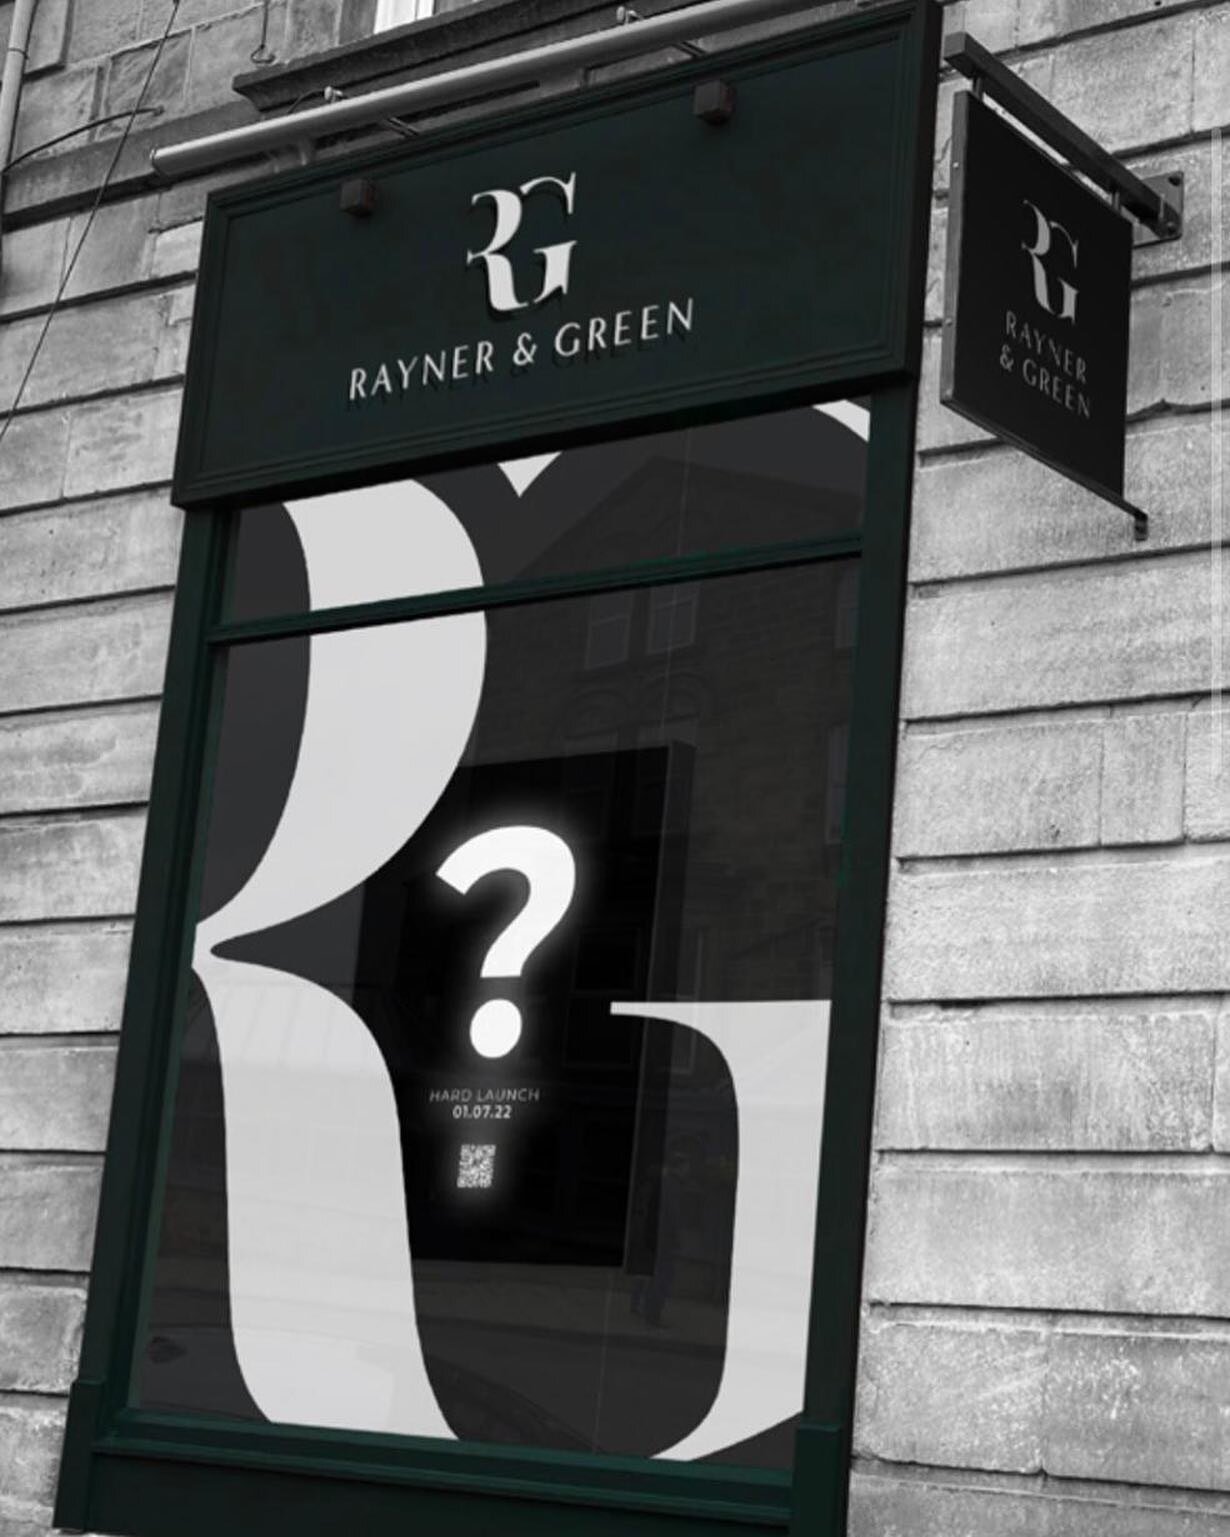 sᴀʟᴏɴ ᴀɴɴᴏᴜɴᴄᴇᴍᴇɴᴛ!
It&rsquo;s official! We&rsquo;re now finally Rayner&amp;Green!
We&rsquo;re still located at 27 Cheltenham Crescent, but will be rebranding and renovating the salon over the next few months! Please visit our website www.raynerandgr